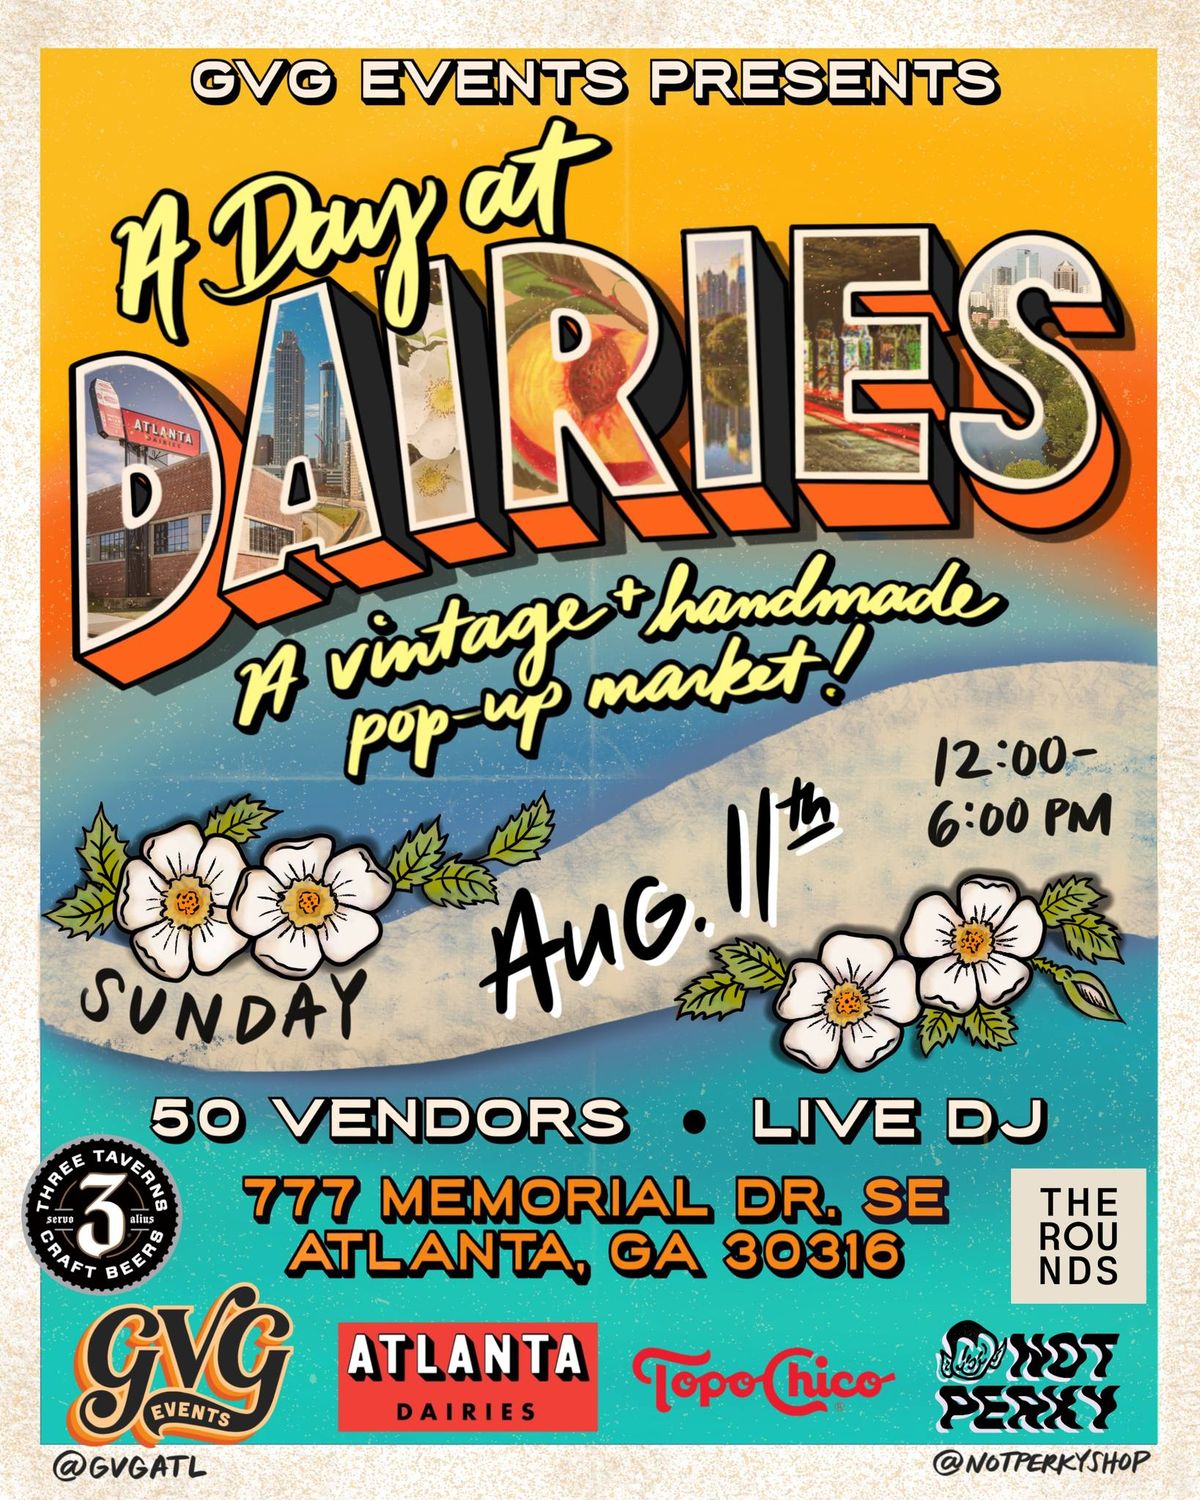 A Day at Dairies- A Vintage and Handmade Pop-Up